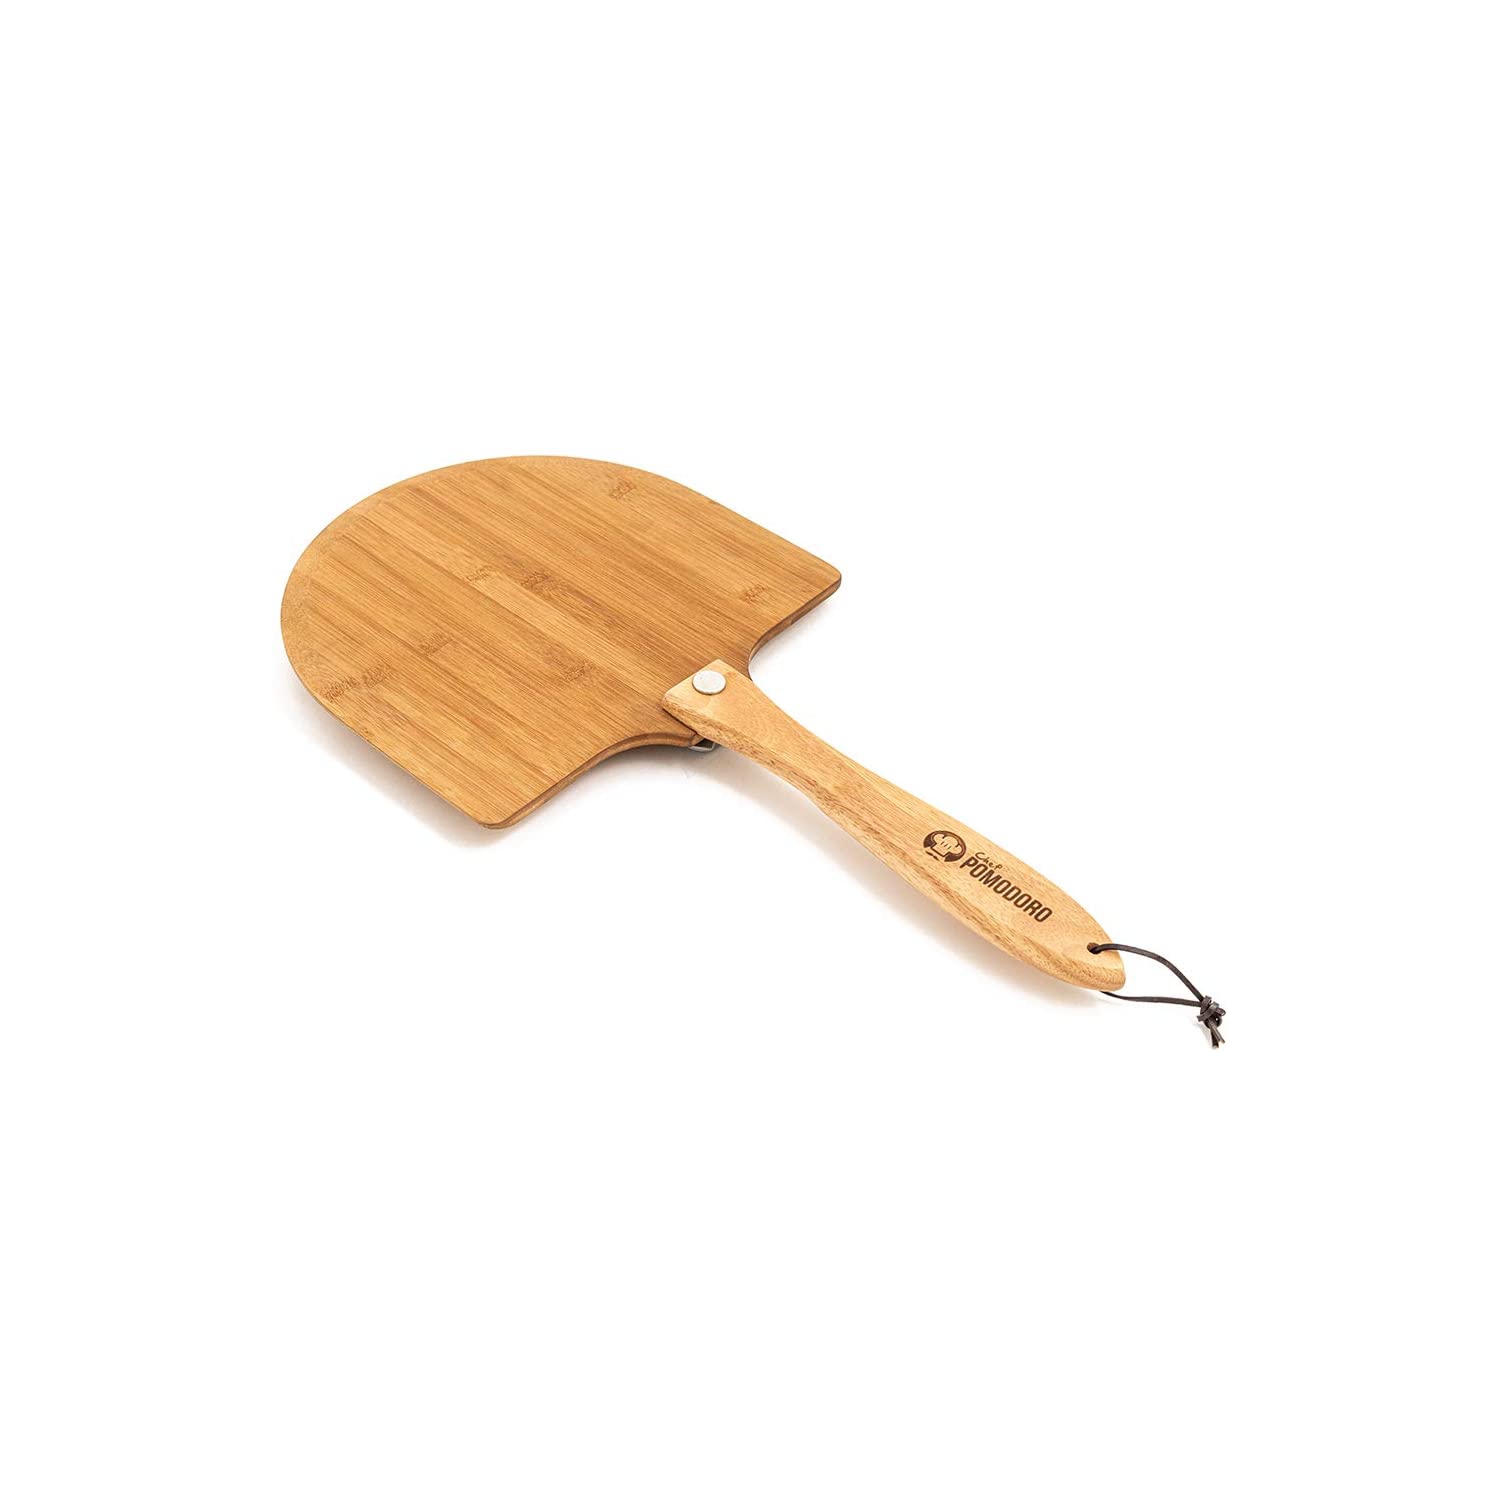 Chef Pomodoro Bamboo Pizza Peel with Foldable Wood Handle for Easy Storage, 12-Inch Diameter, Gourmet Luxury Pizza Paddle for Baking Homemade Pizza Bread